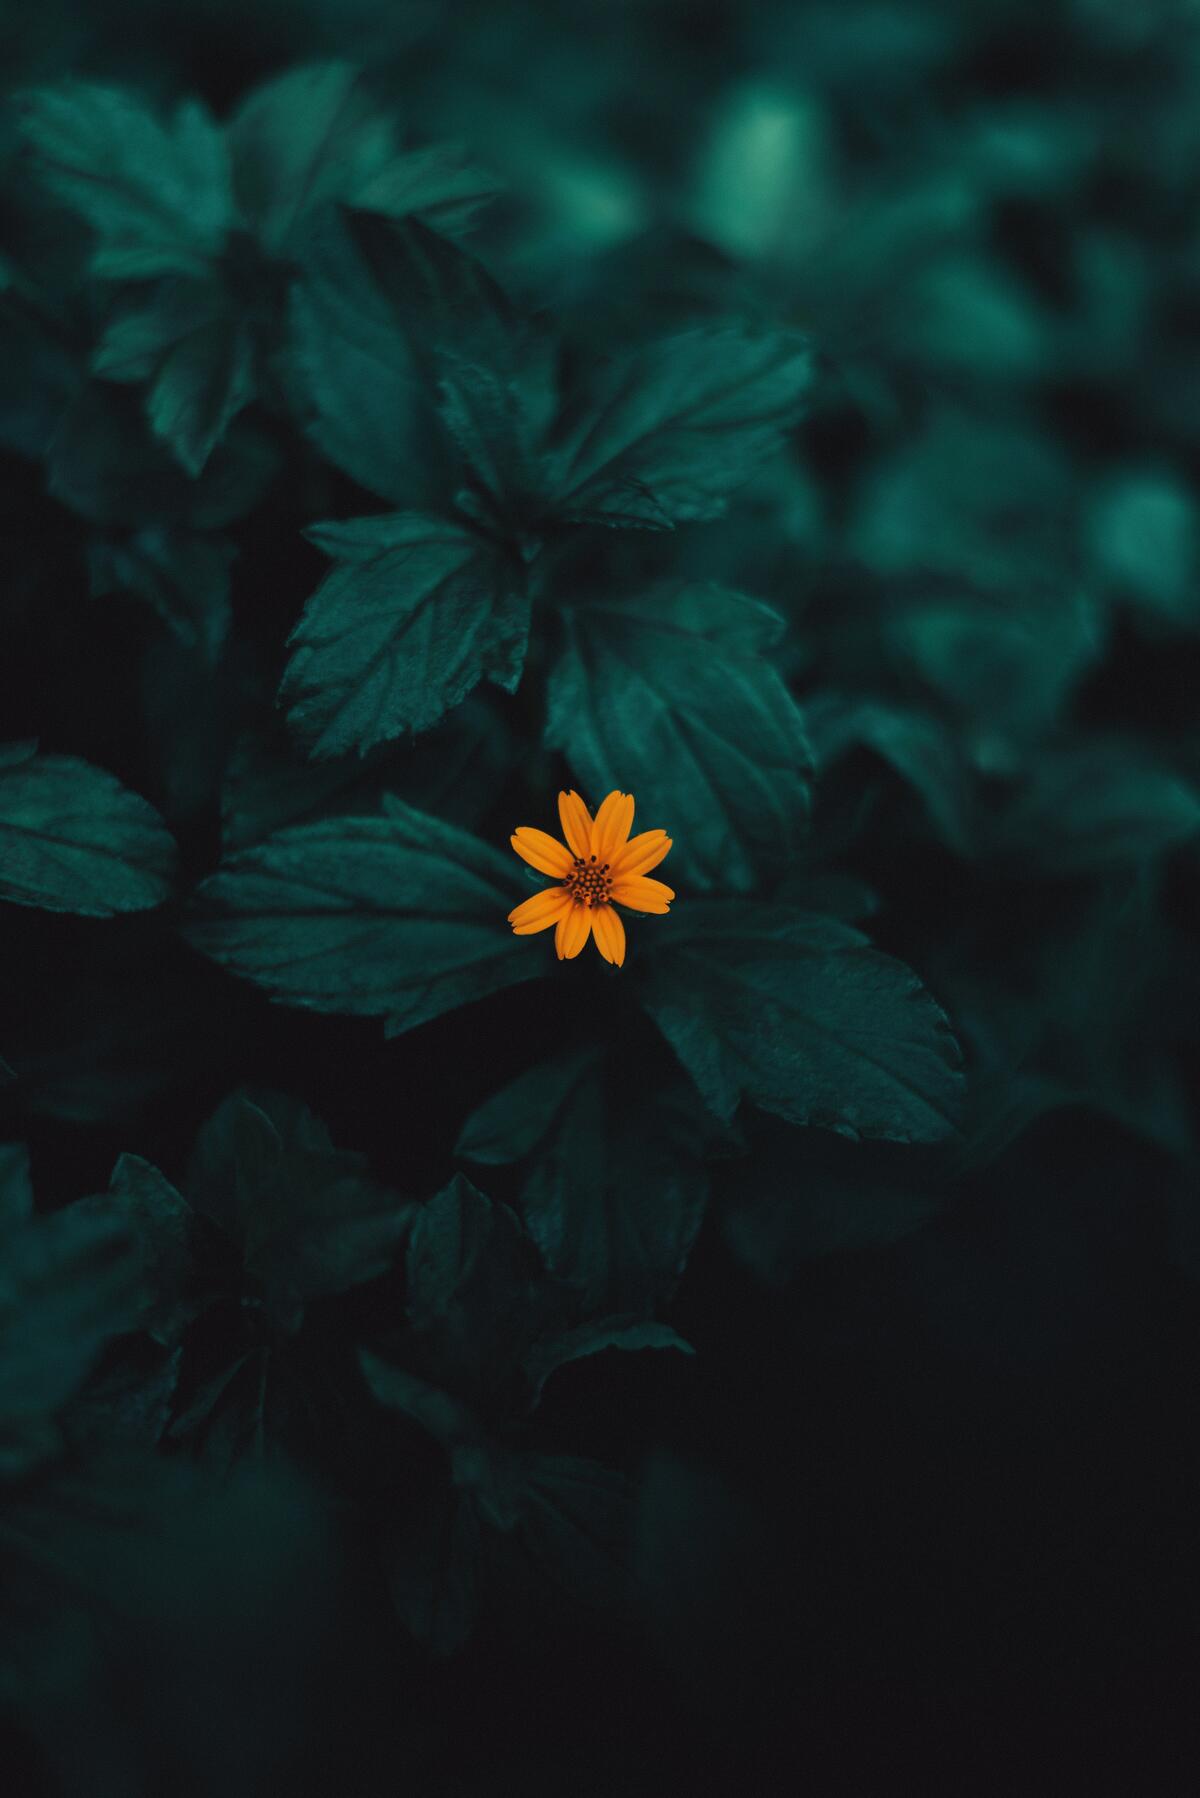 A single yellow flower on a green background